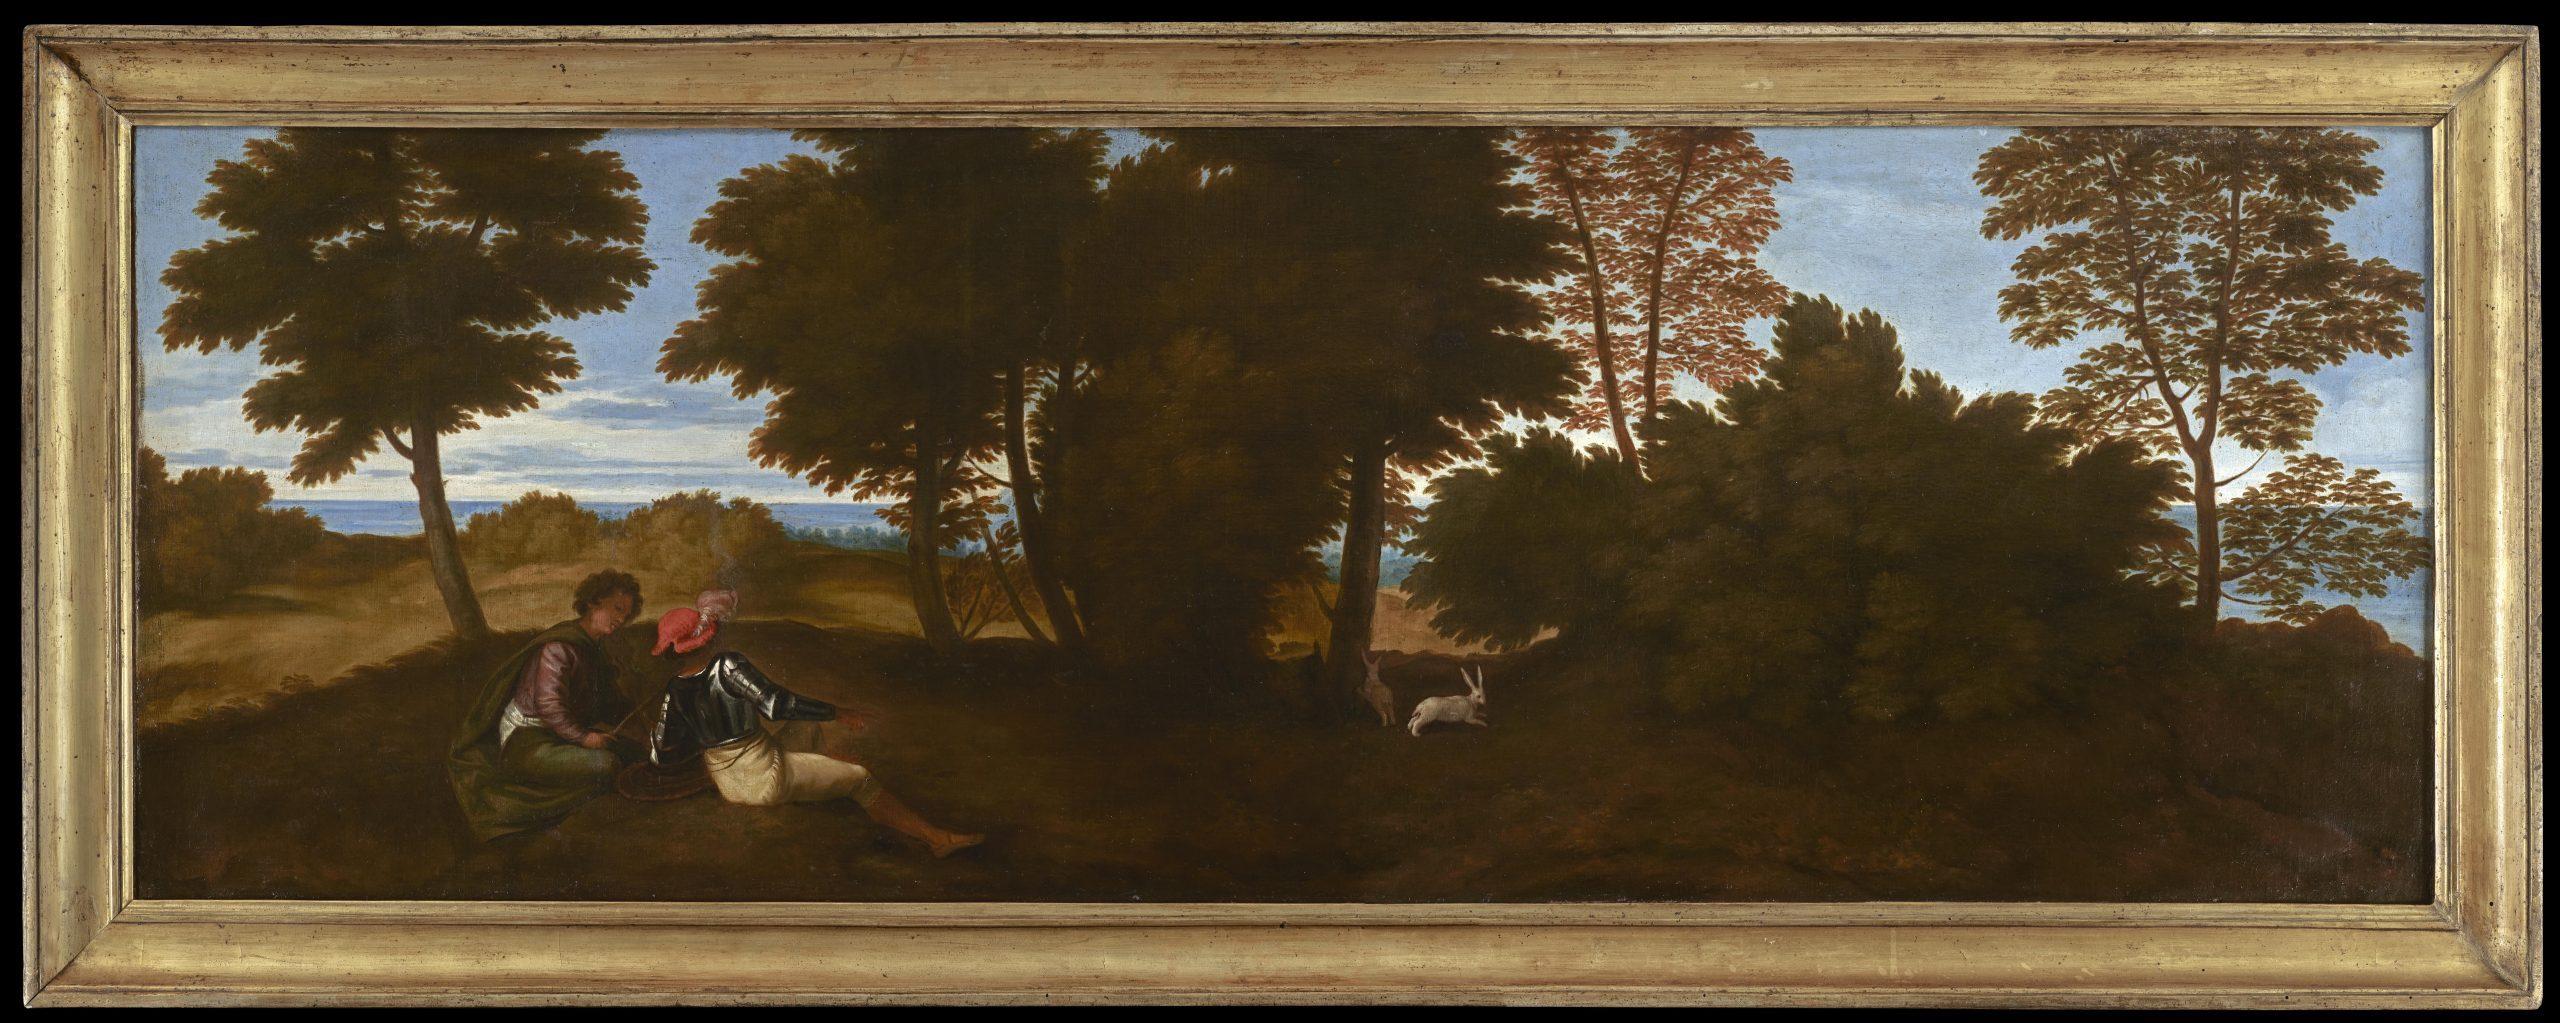 The Two Hares, Arcadian late 17th Century Italian Landscape